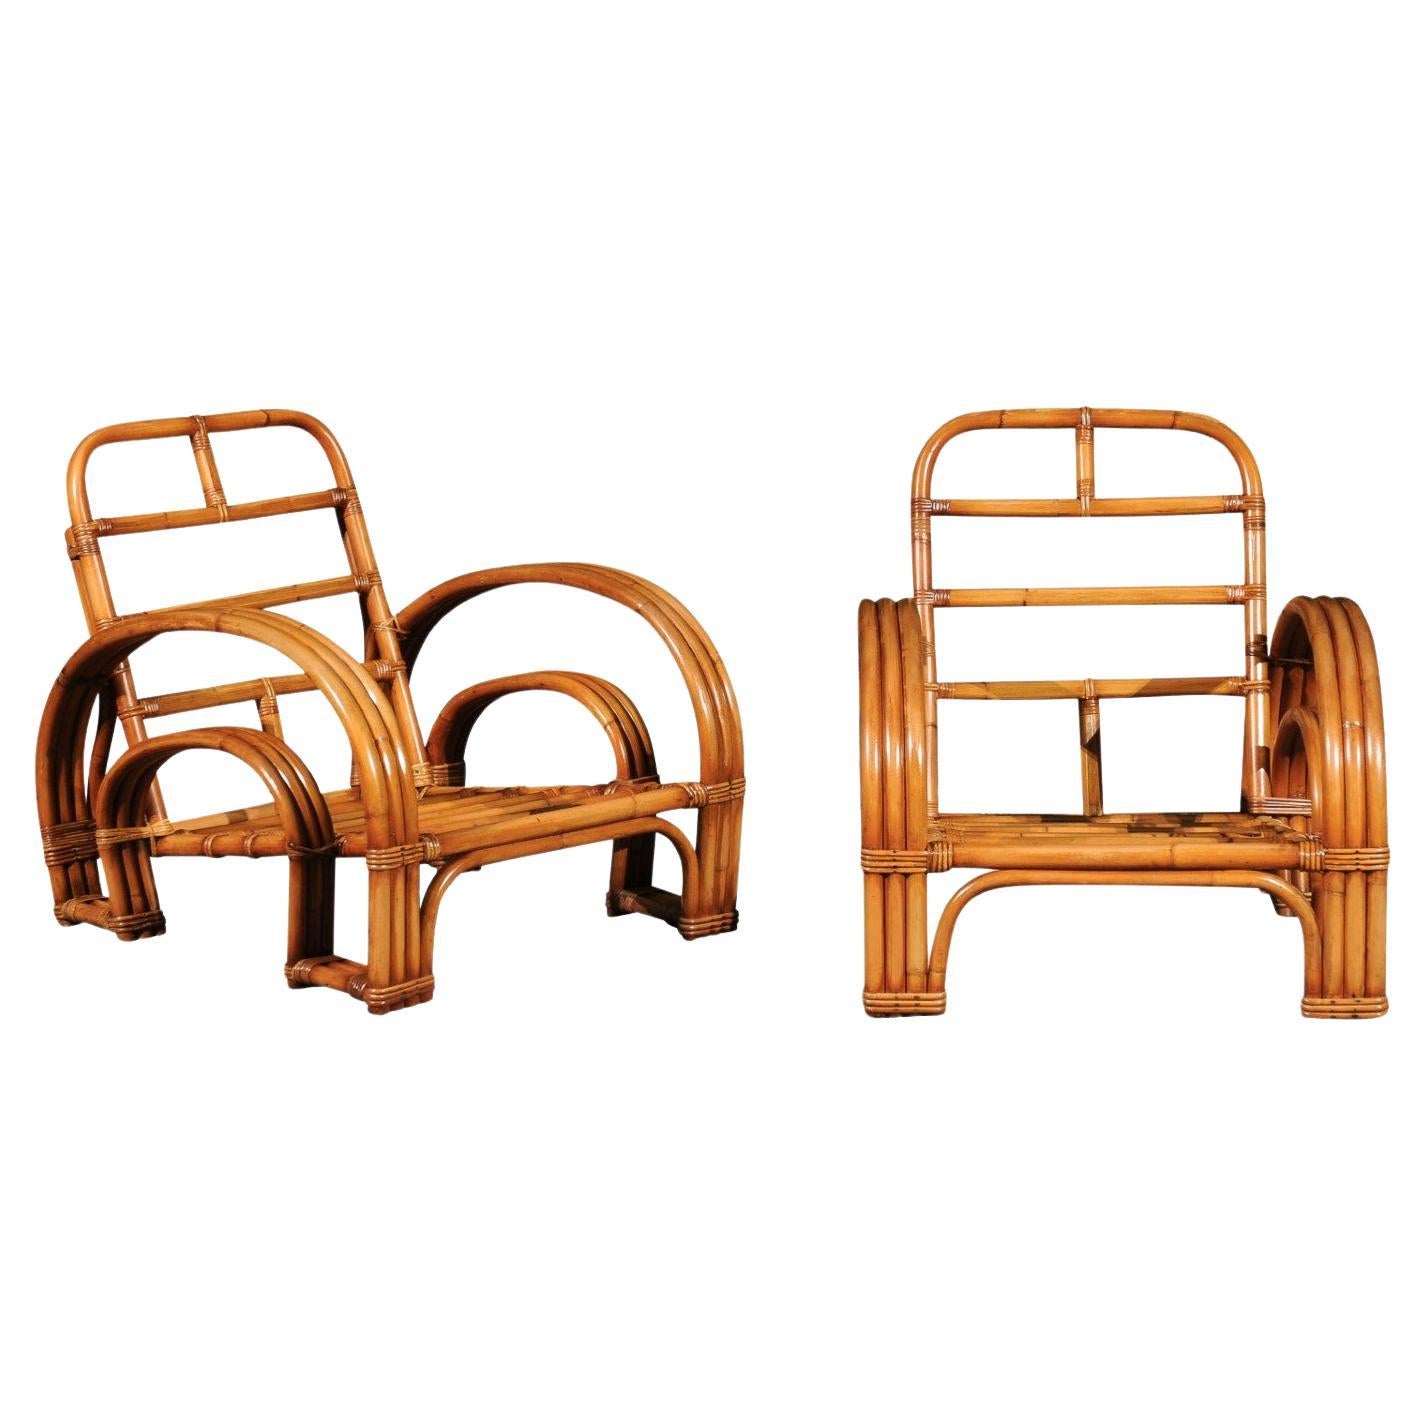 Unforgettable Pair of Art Deco Rattan and Cane Double Horseshoe Loungers  For Sale